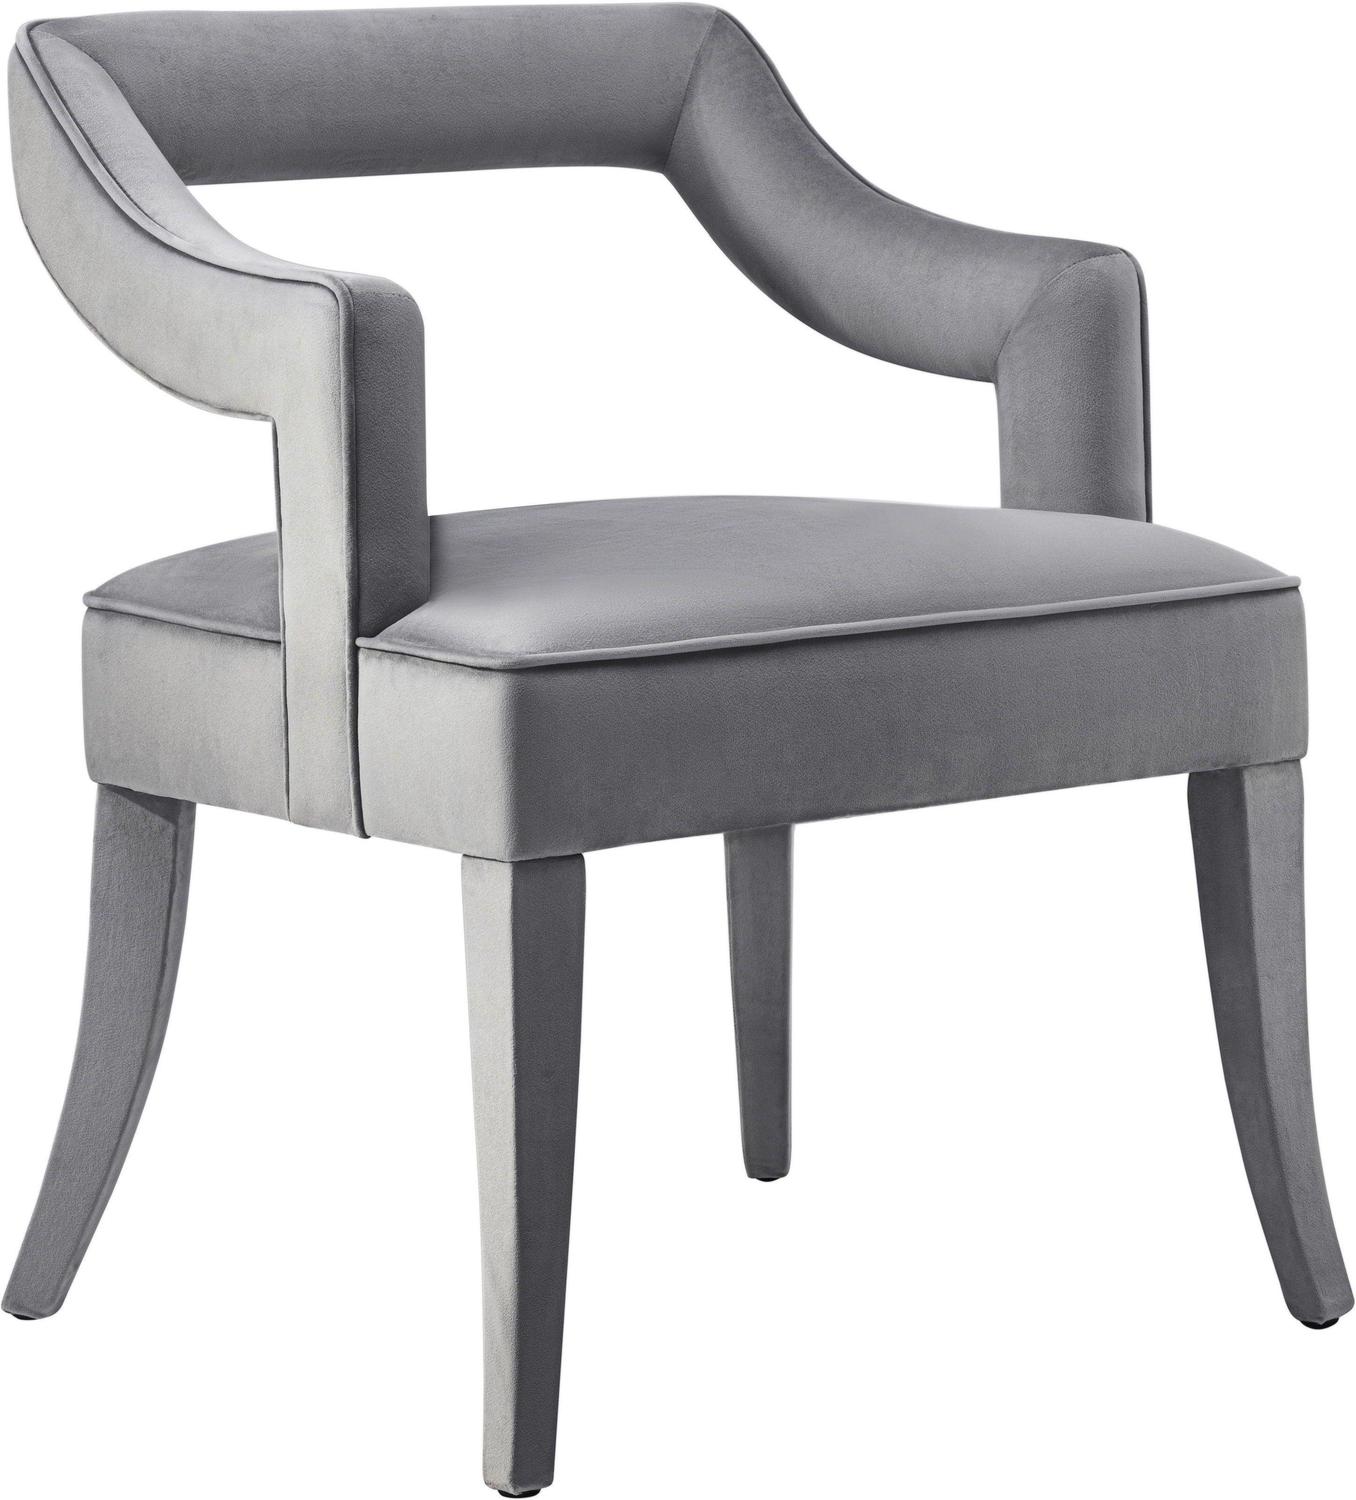  Tov Furniture Dining Chairs Chairs Grey